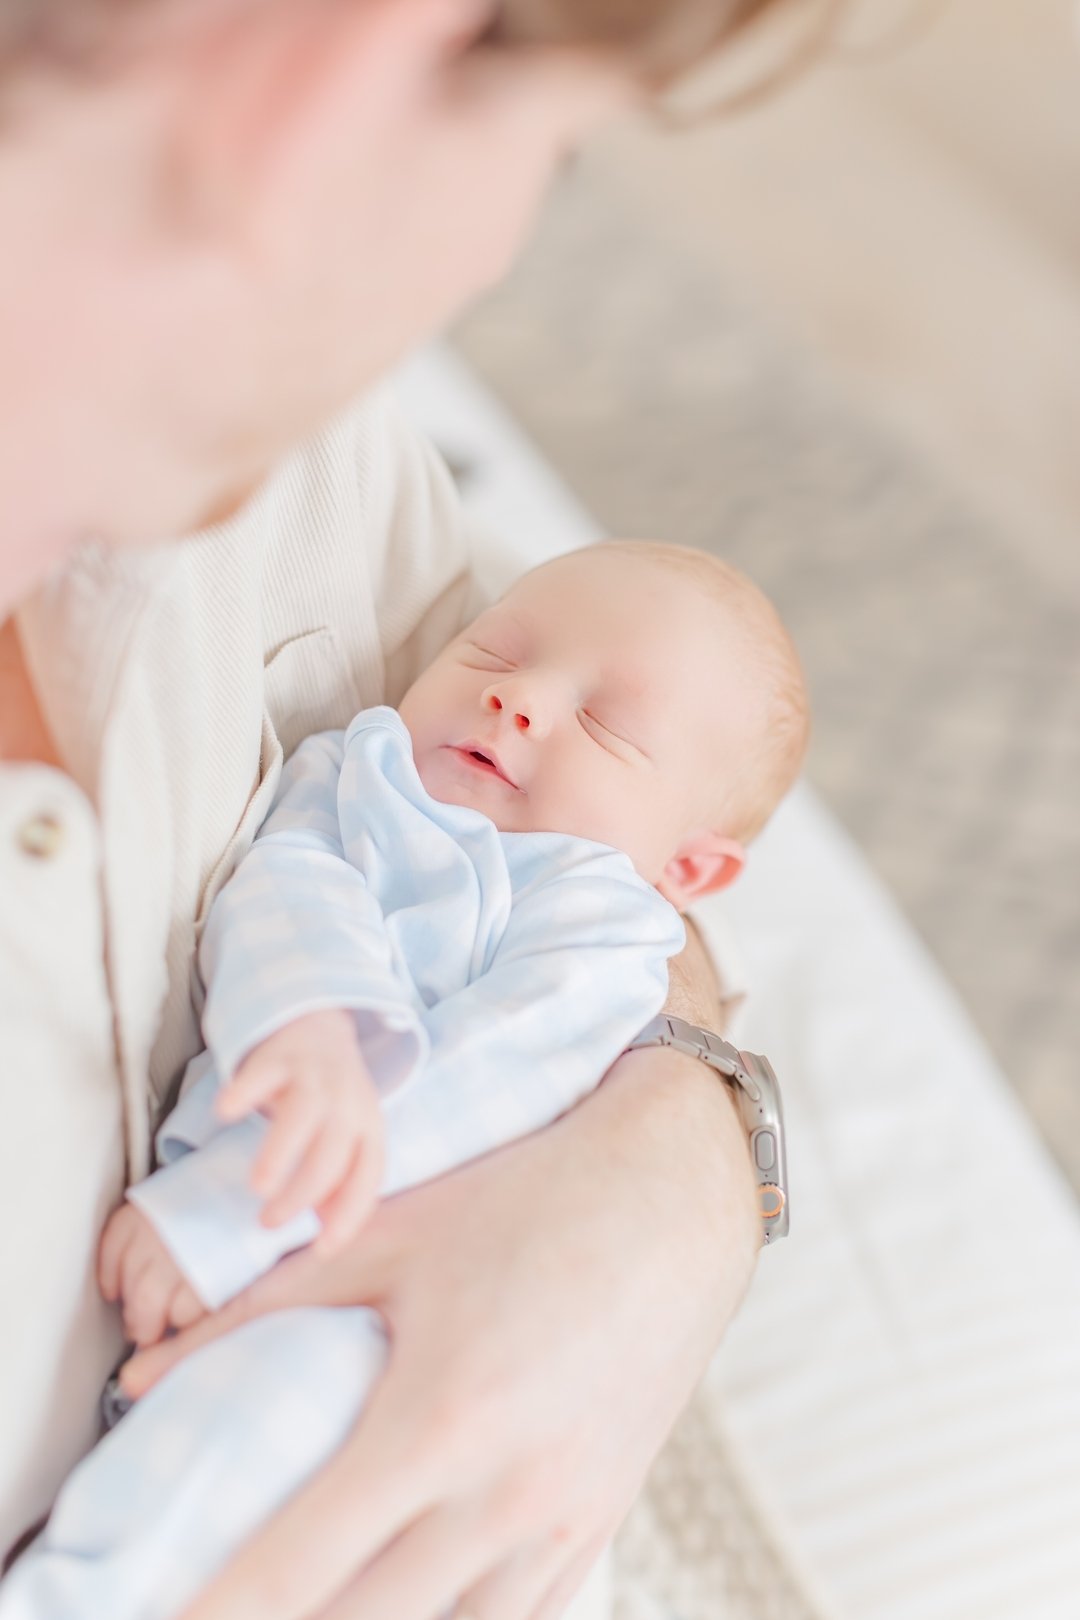 They grow up so fast, but with newborn photography, you can treasure their tiny features forever. Let's create beautiful memories together! 💫👣 #NewbornMagic #CherishedMoments #newbornphotographer #lifestylenewbornphotographer #greenvillescnewbornph